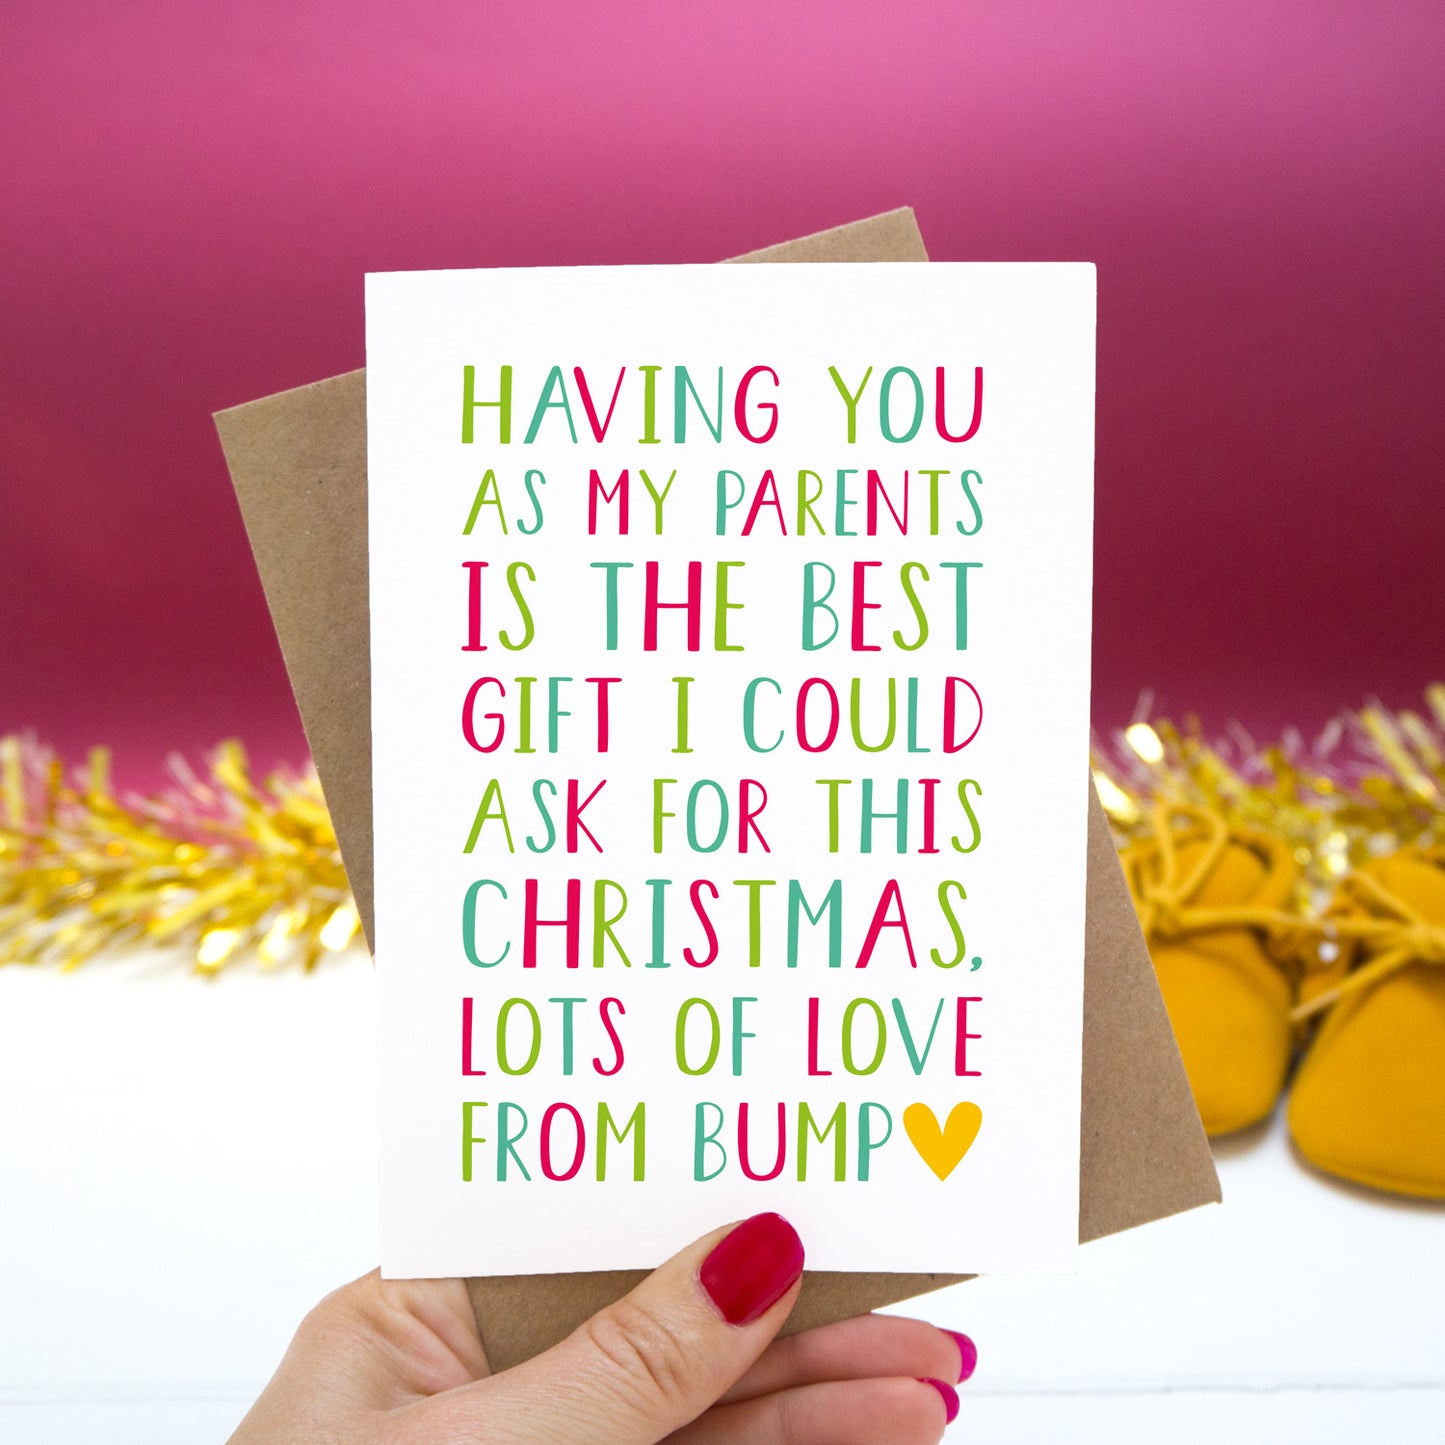 Having you as my Parents is the best gift I could ask for this Christmas, lots of love from bump." - Christmas bump card with red and green text set on a red background with gold tinsel and mustard shoes.